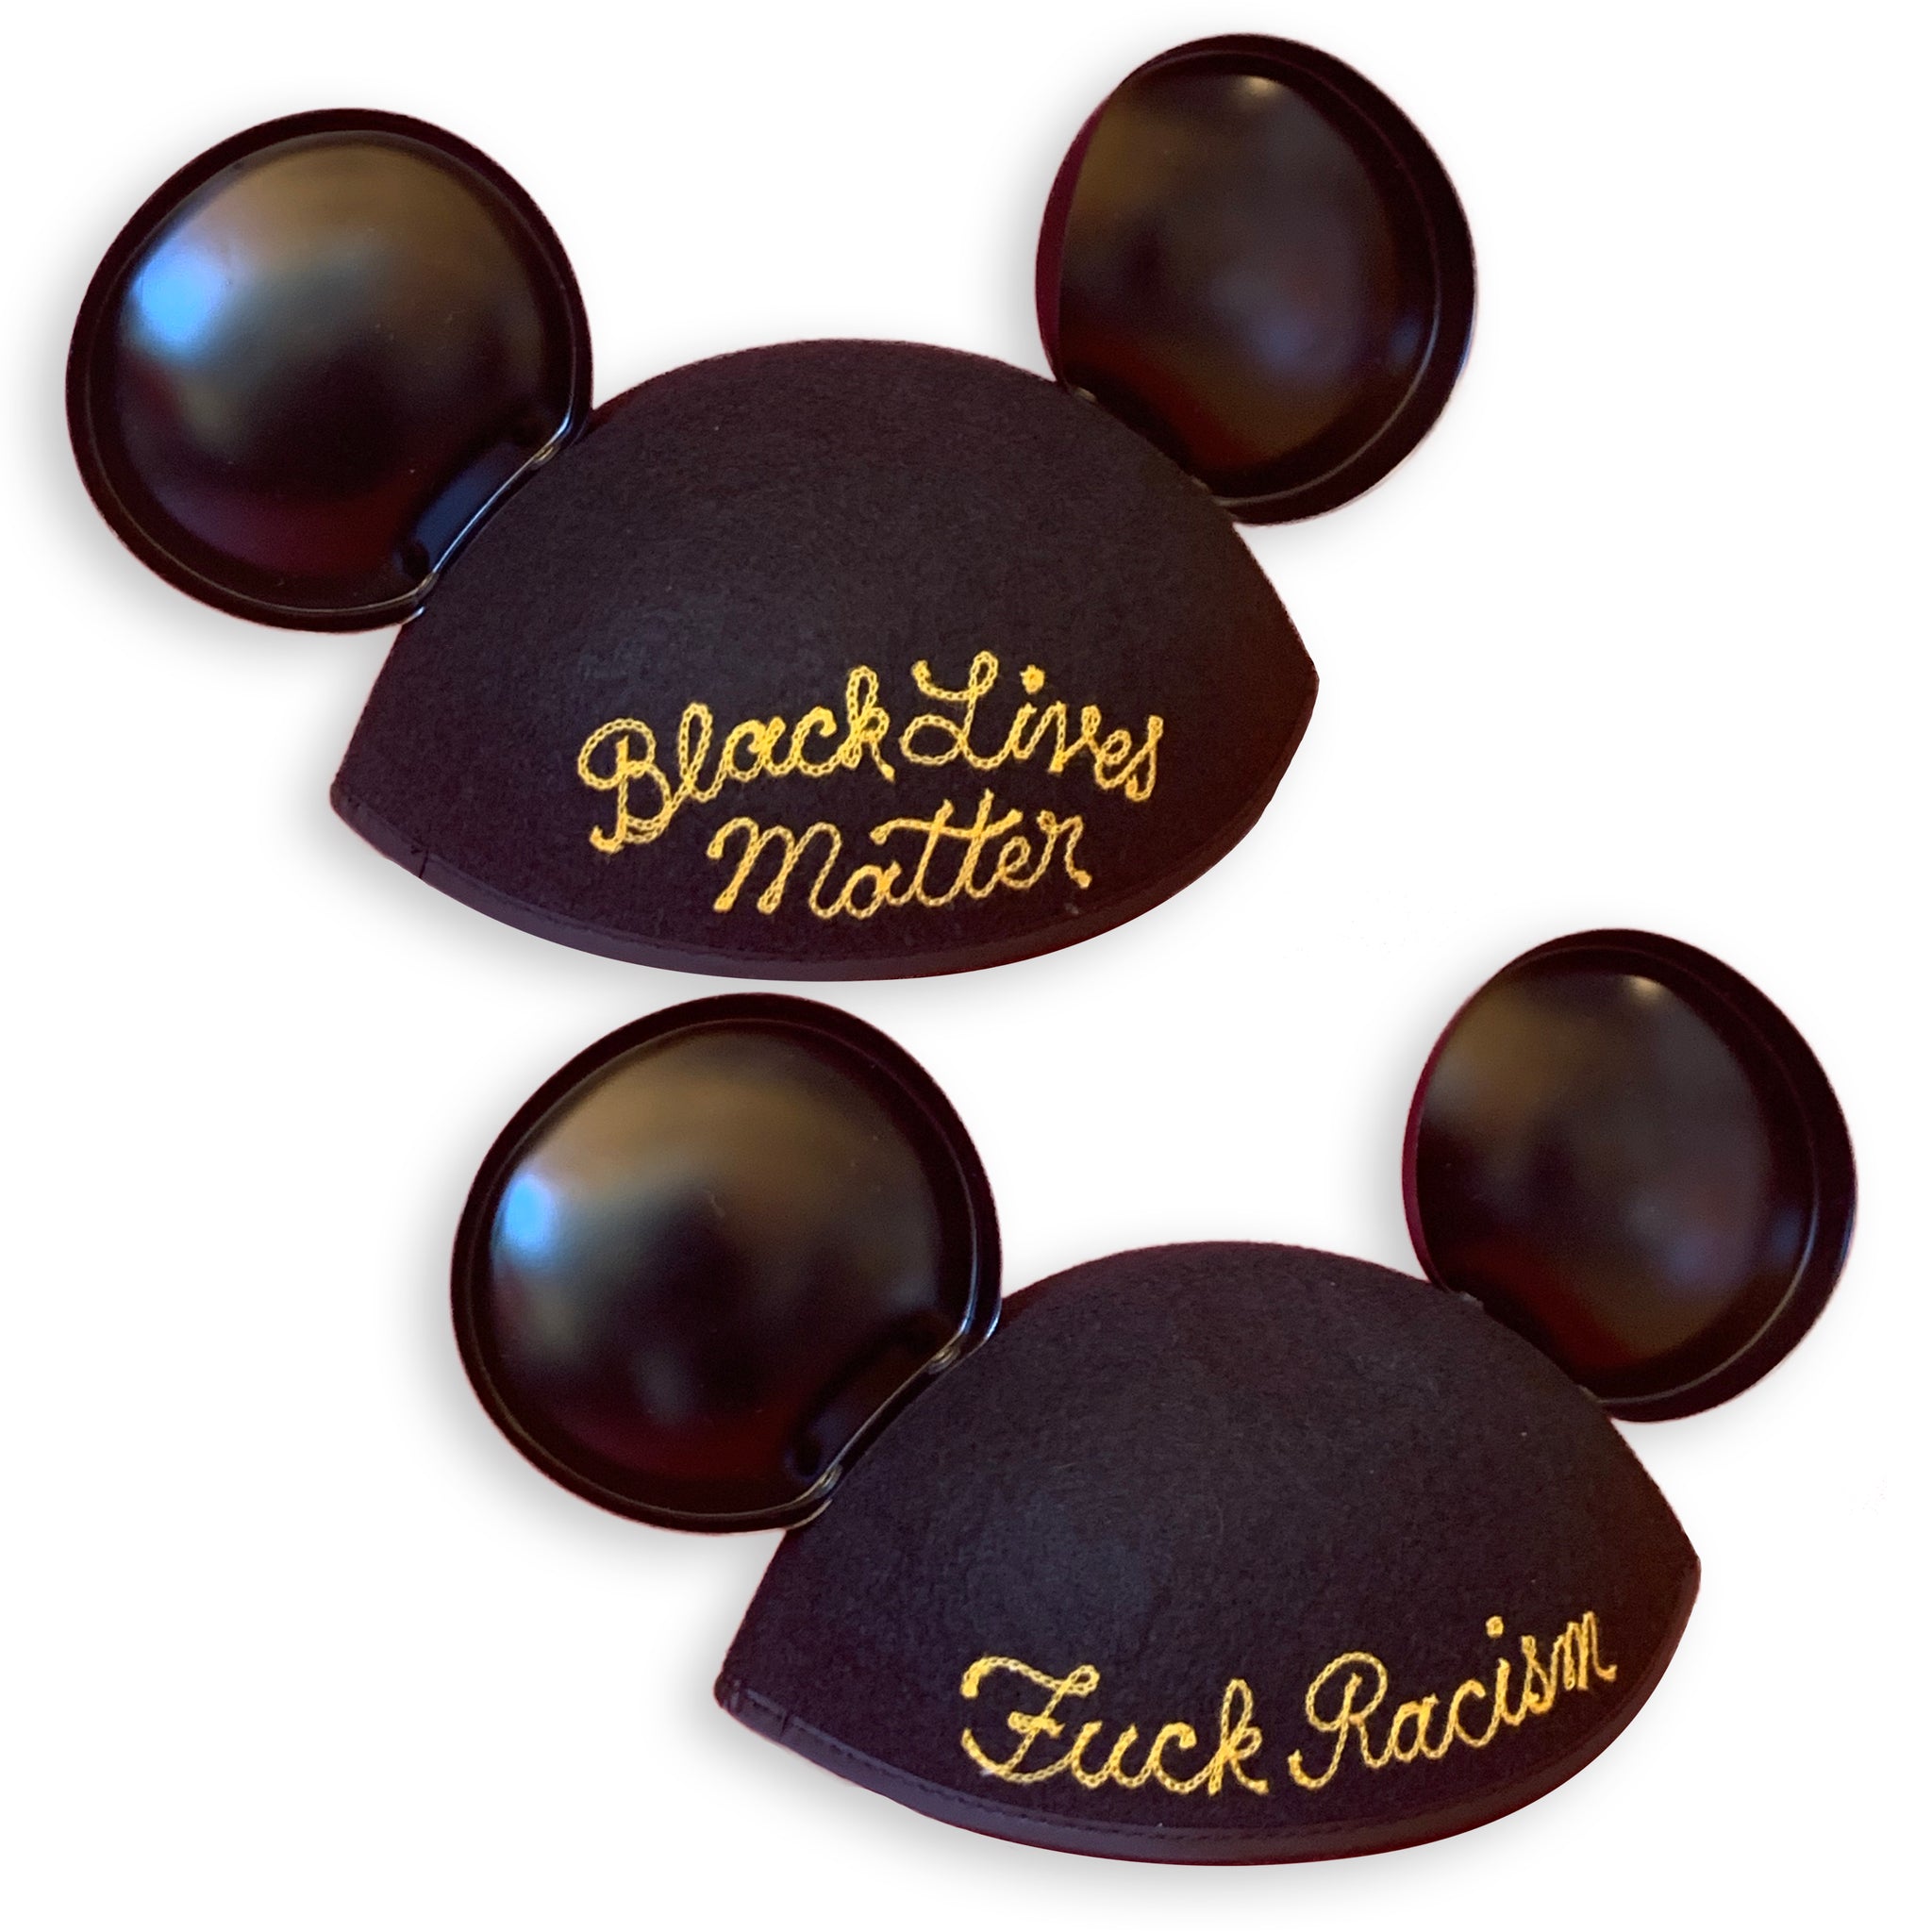 Mickey Ears Resin Sculpture - Faceted Front / Smooth Back - Gold